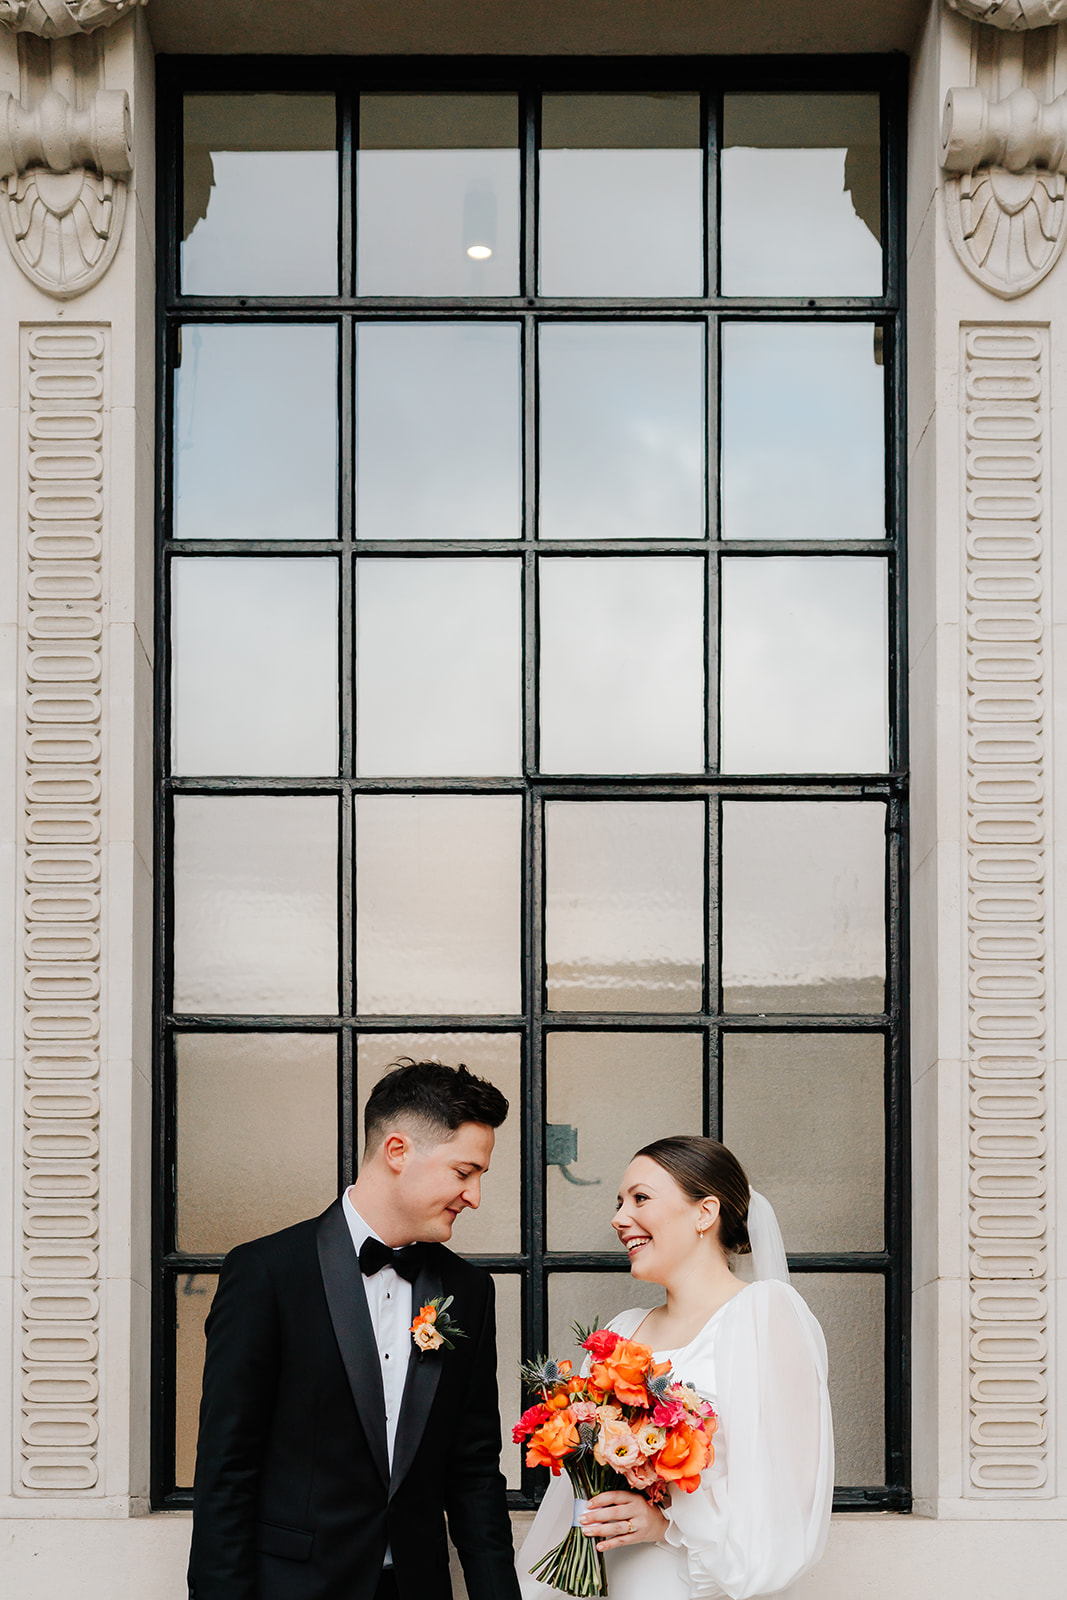 Relaxed Wedding Photography at Old Marylebone Town Hall | London Wedding Photographer